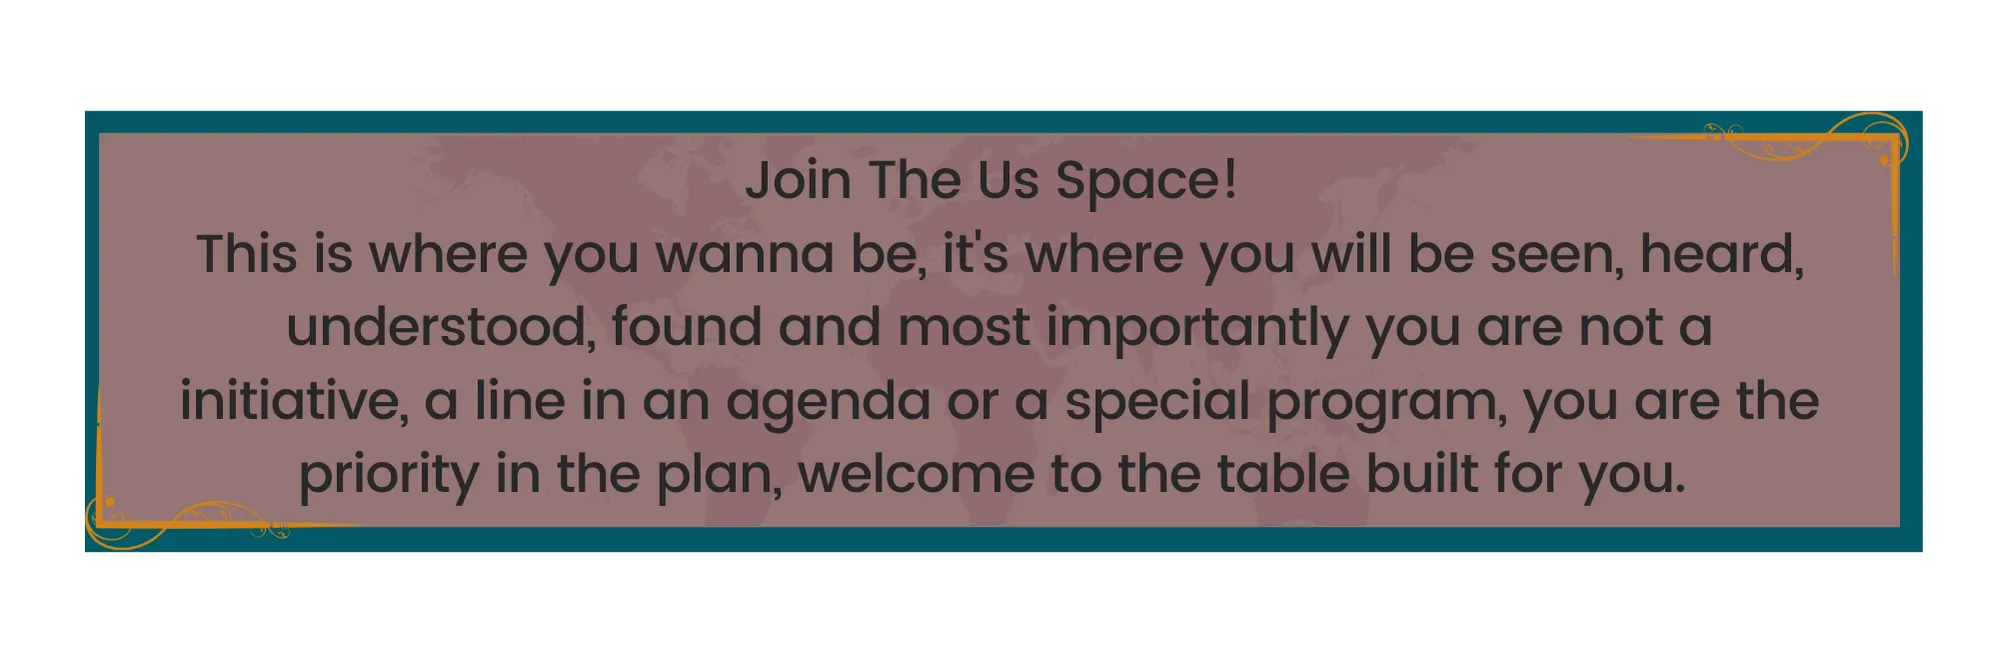 The Us Space - Welcome to The Table